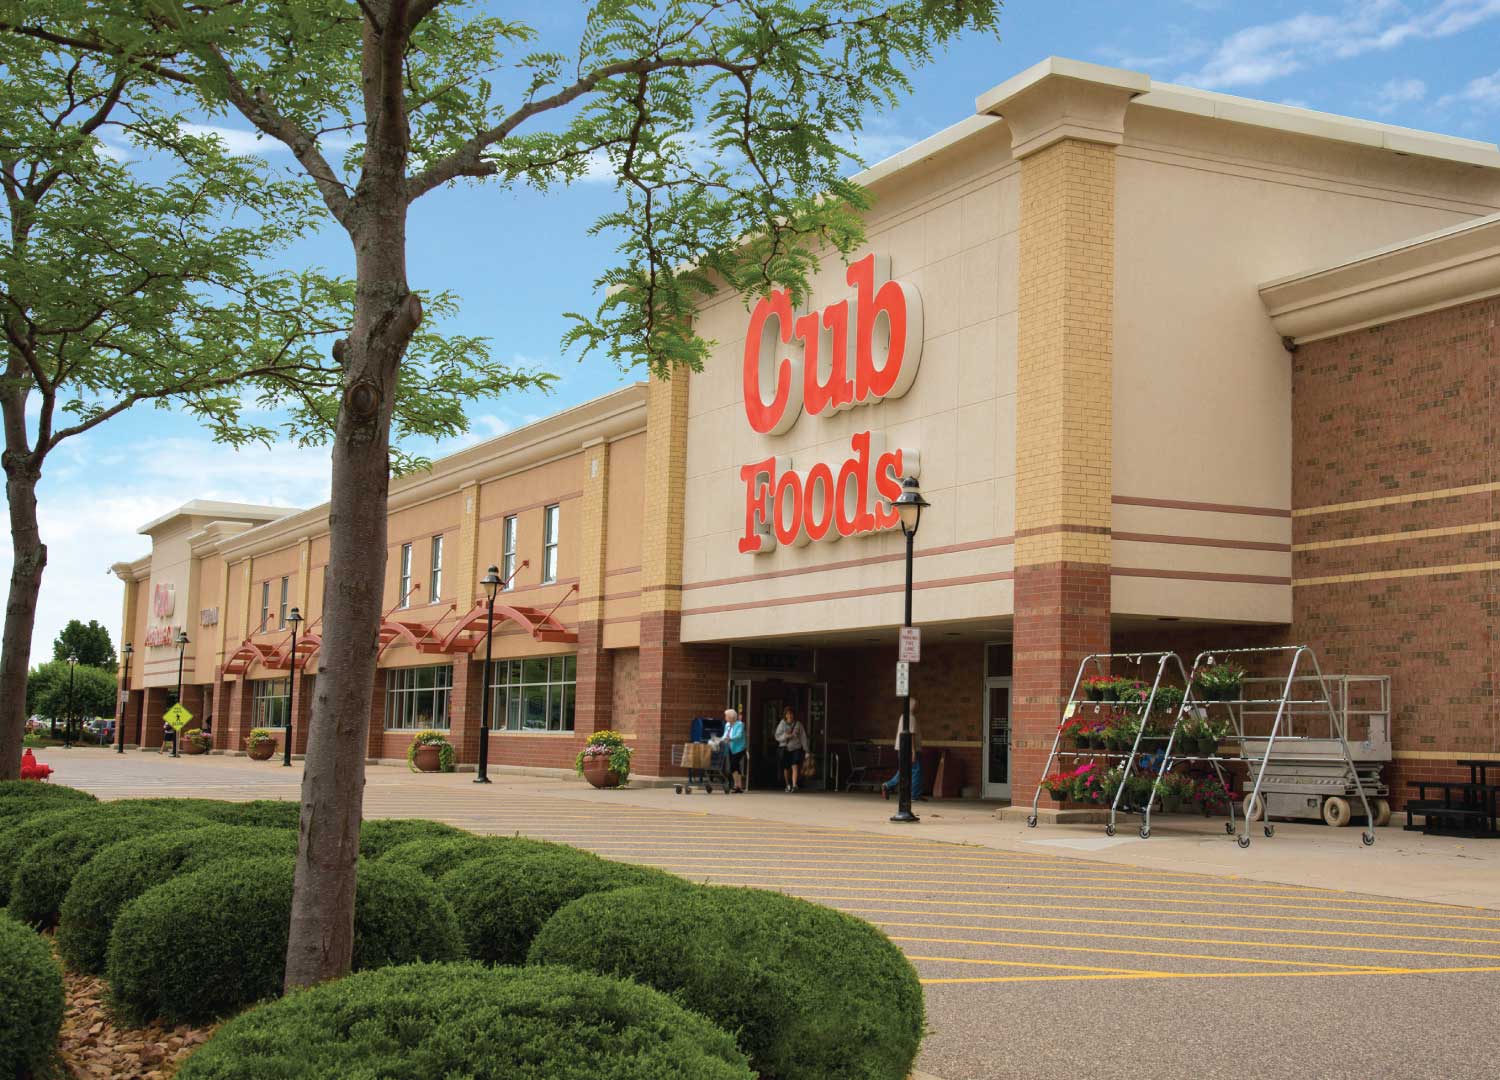 Pine Tree Celebrates 20th Anniversary with Acquisition of Minneapolis-area Shopping Center in Partnership with The Davis Companies